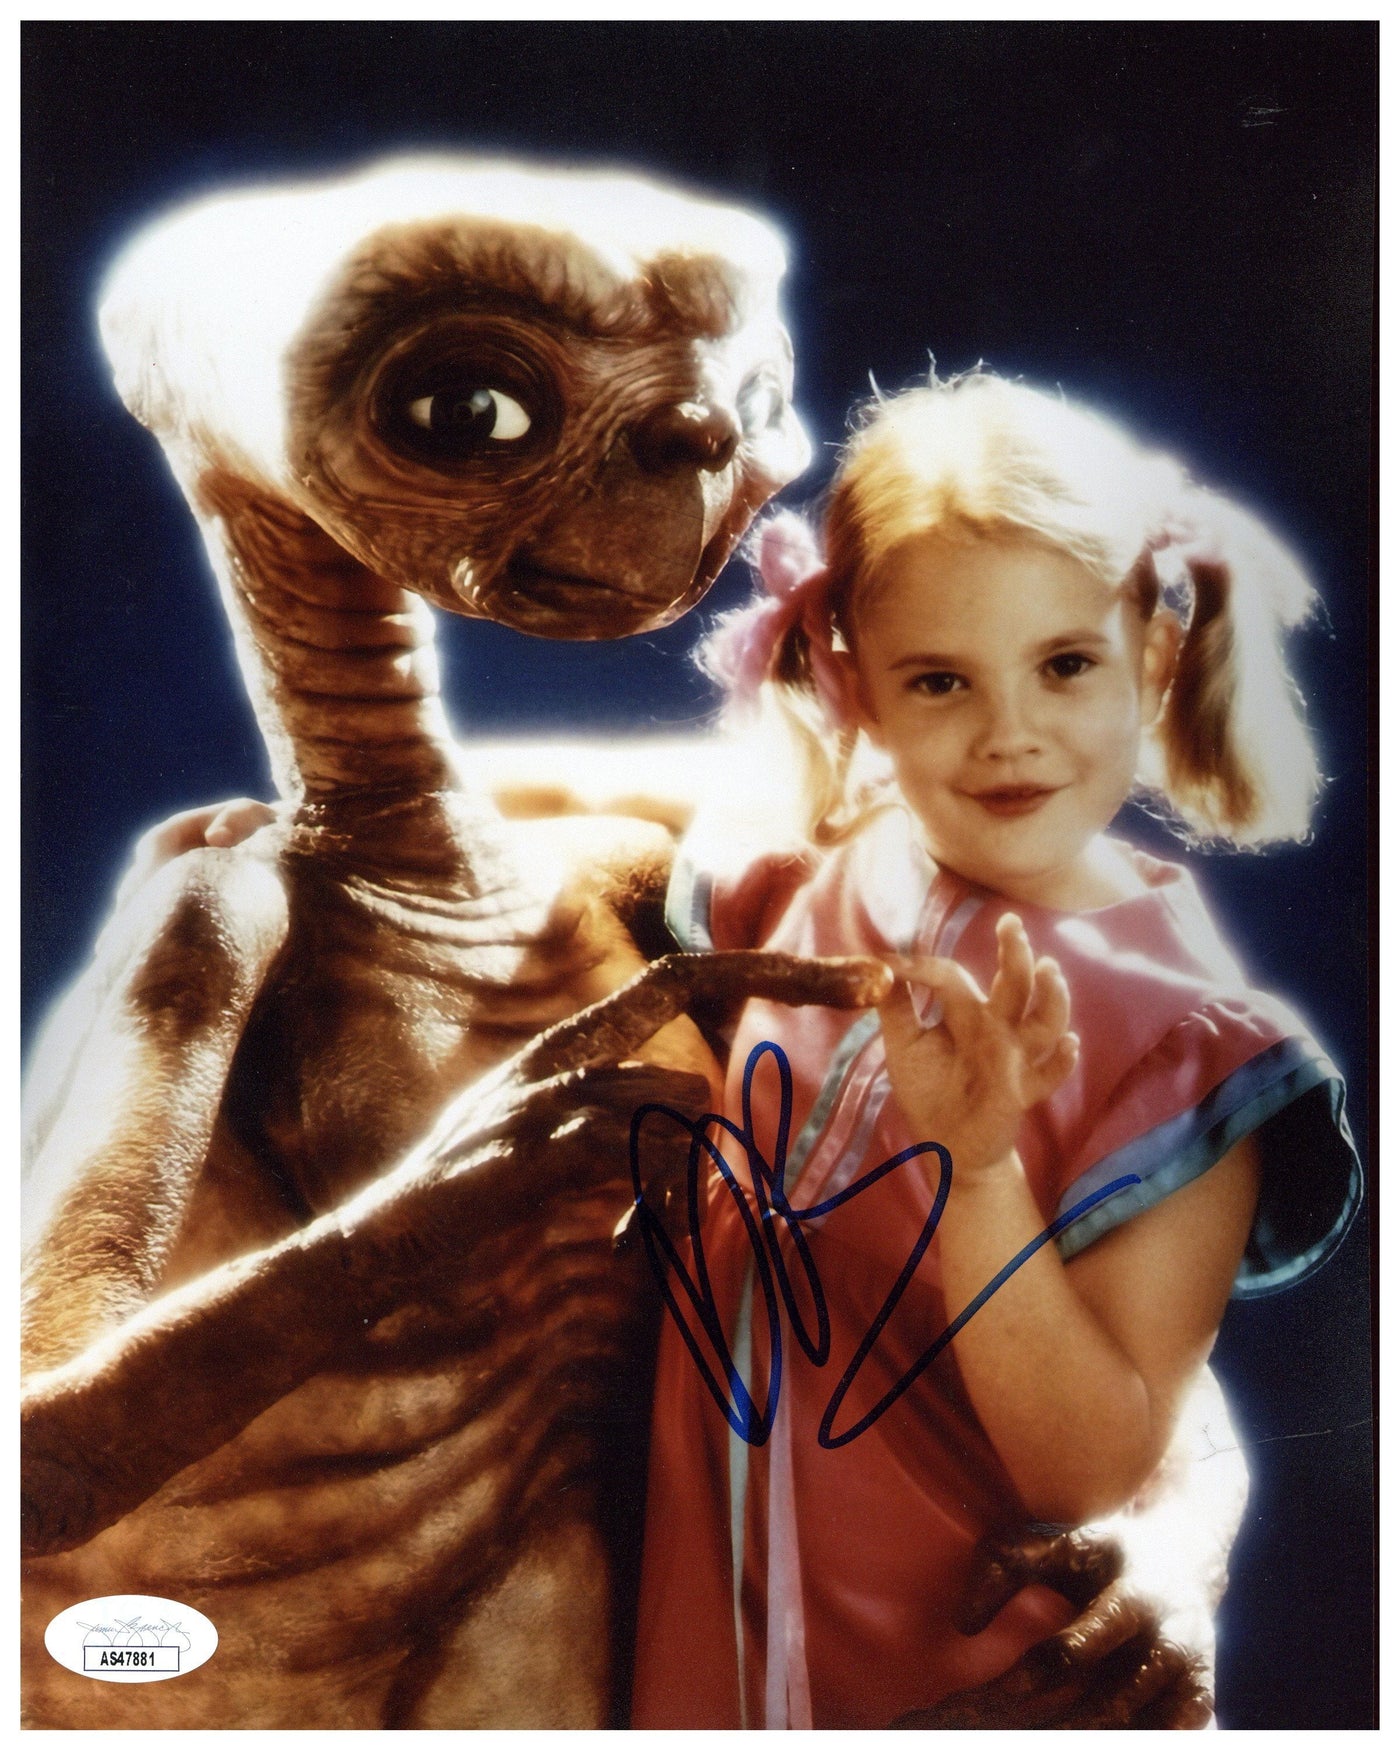 Drew Barrymore Signed 8x10 Photo E.T. The Extra-Terrestrial Autographed JSA COA 3